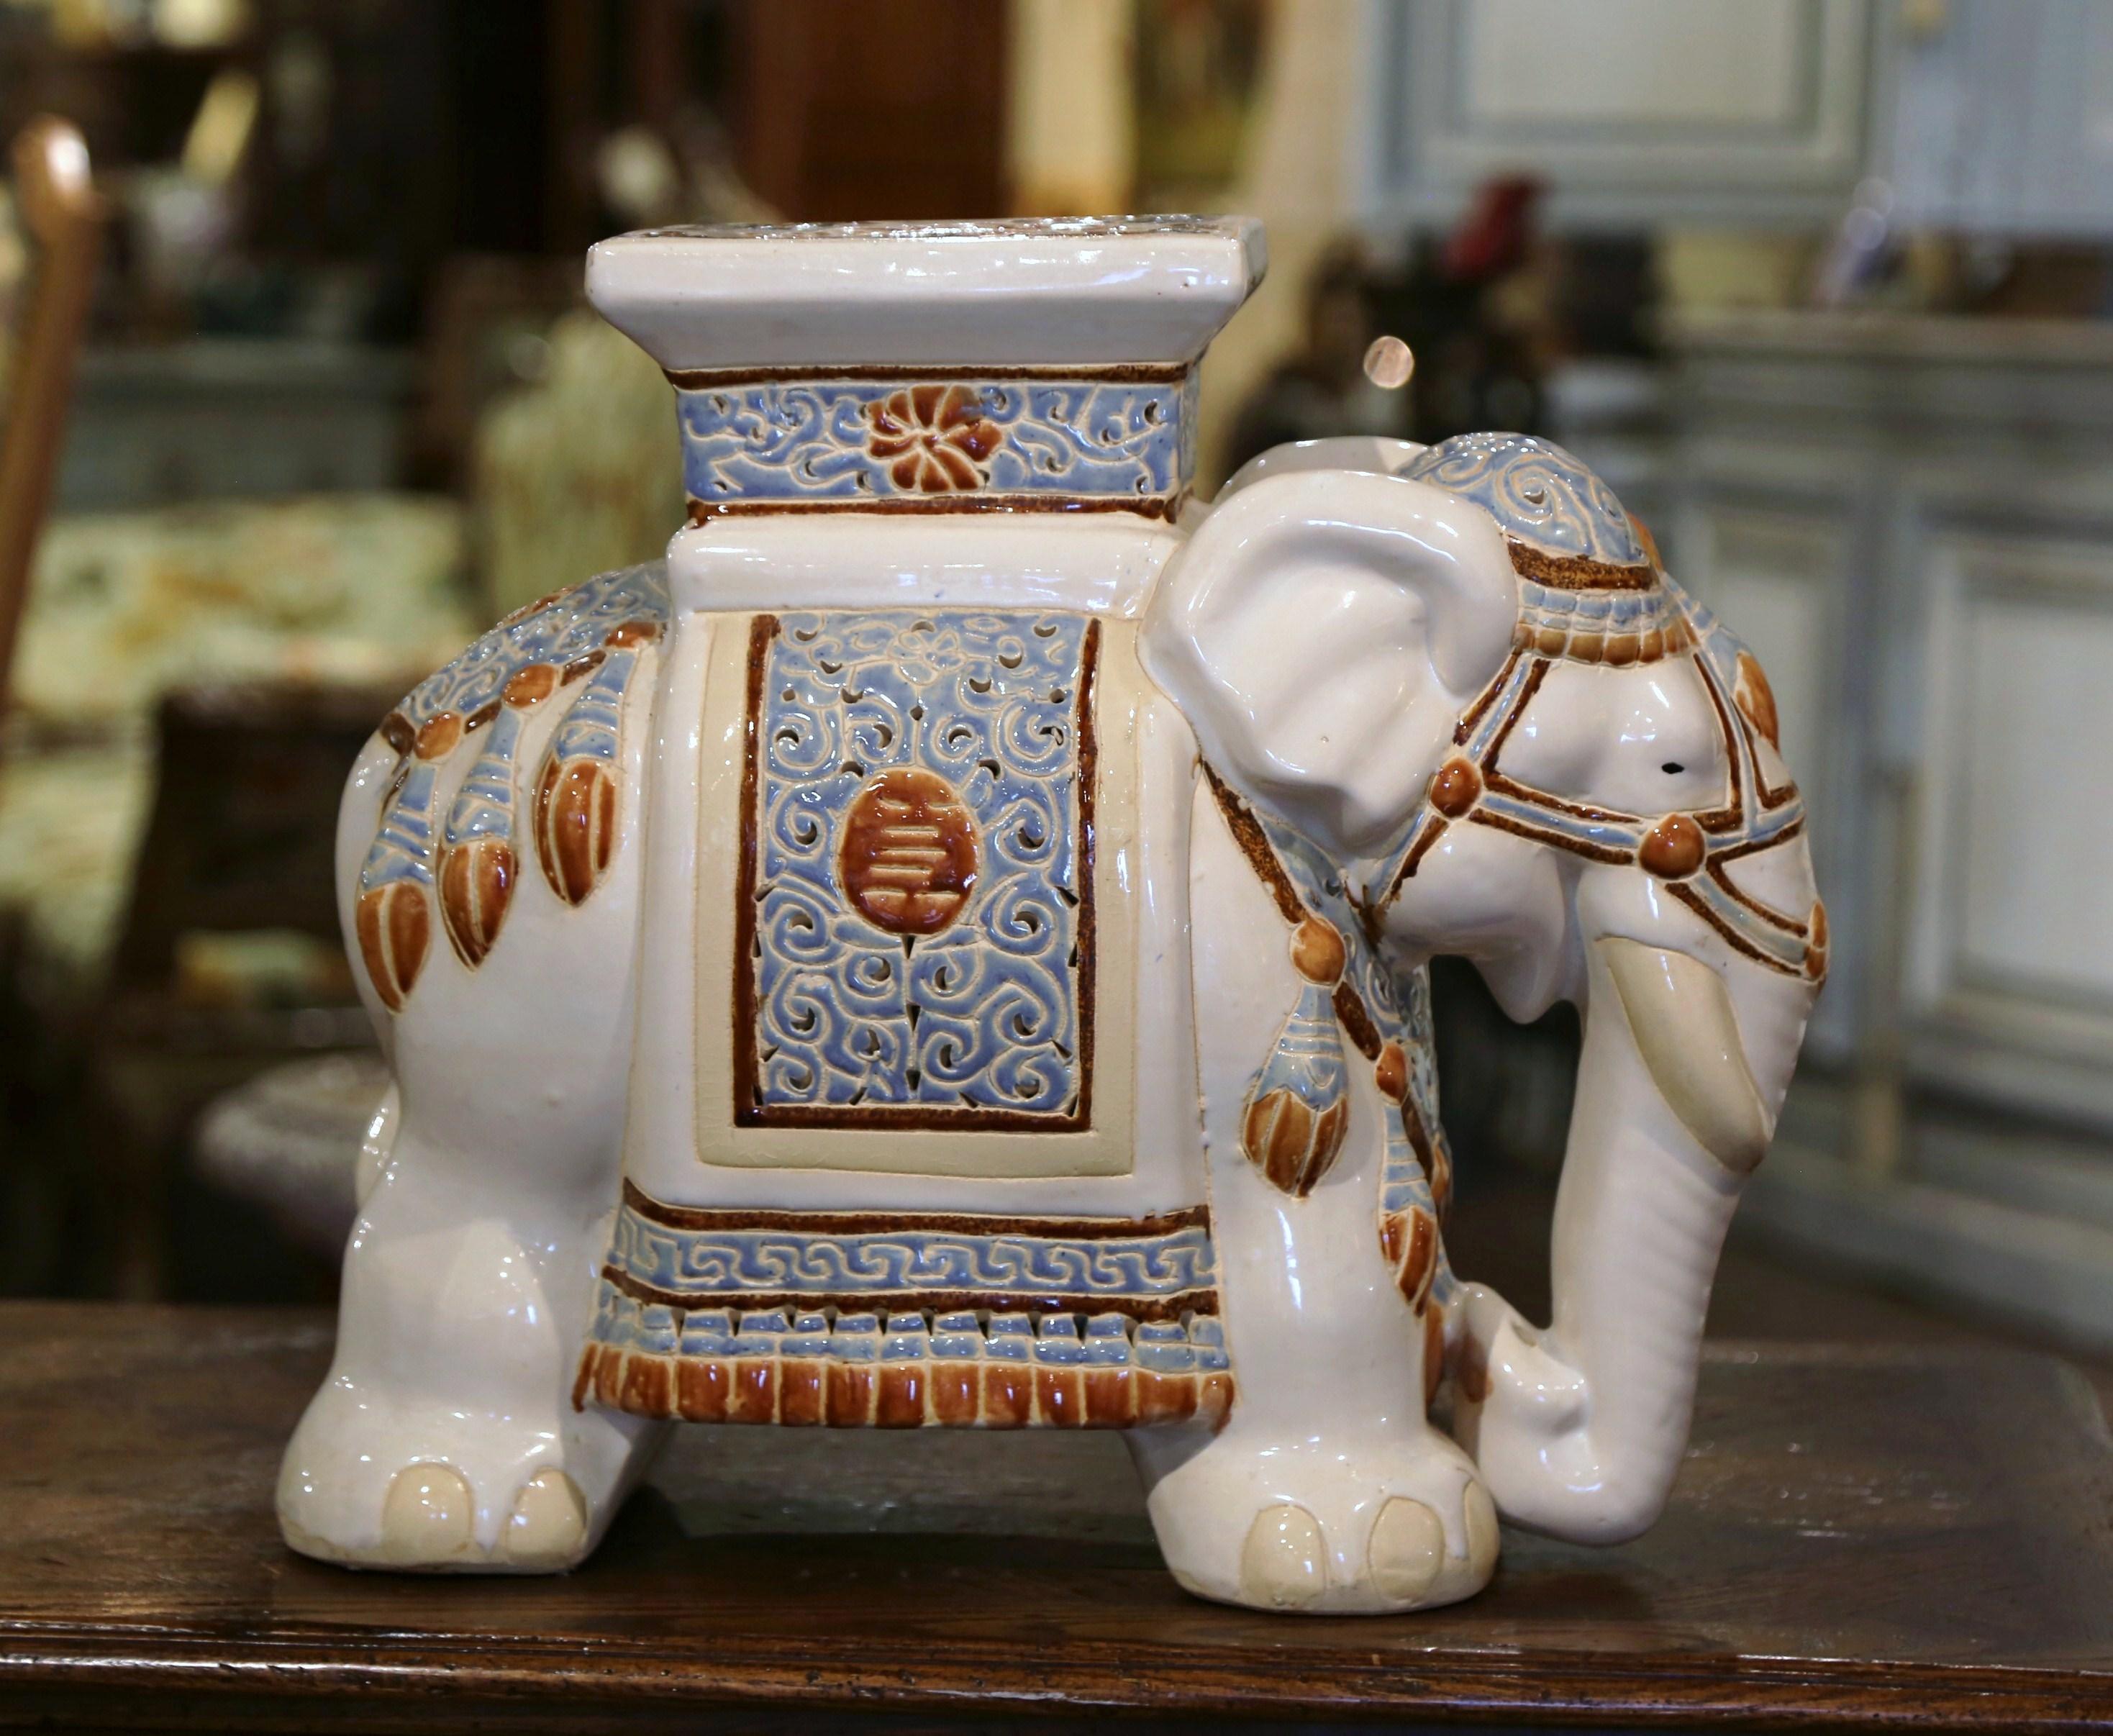 Crafted in Malaysia circa 1960, the ceramic seating is in the shape of an elephant, and heavily decorated in oriental finery. The mammal has a rectangular seat at the top, and is hand painted in the rust, white and pale blue palette. This unique